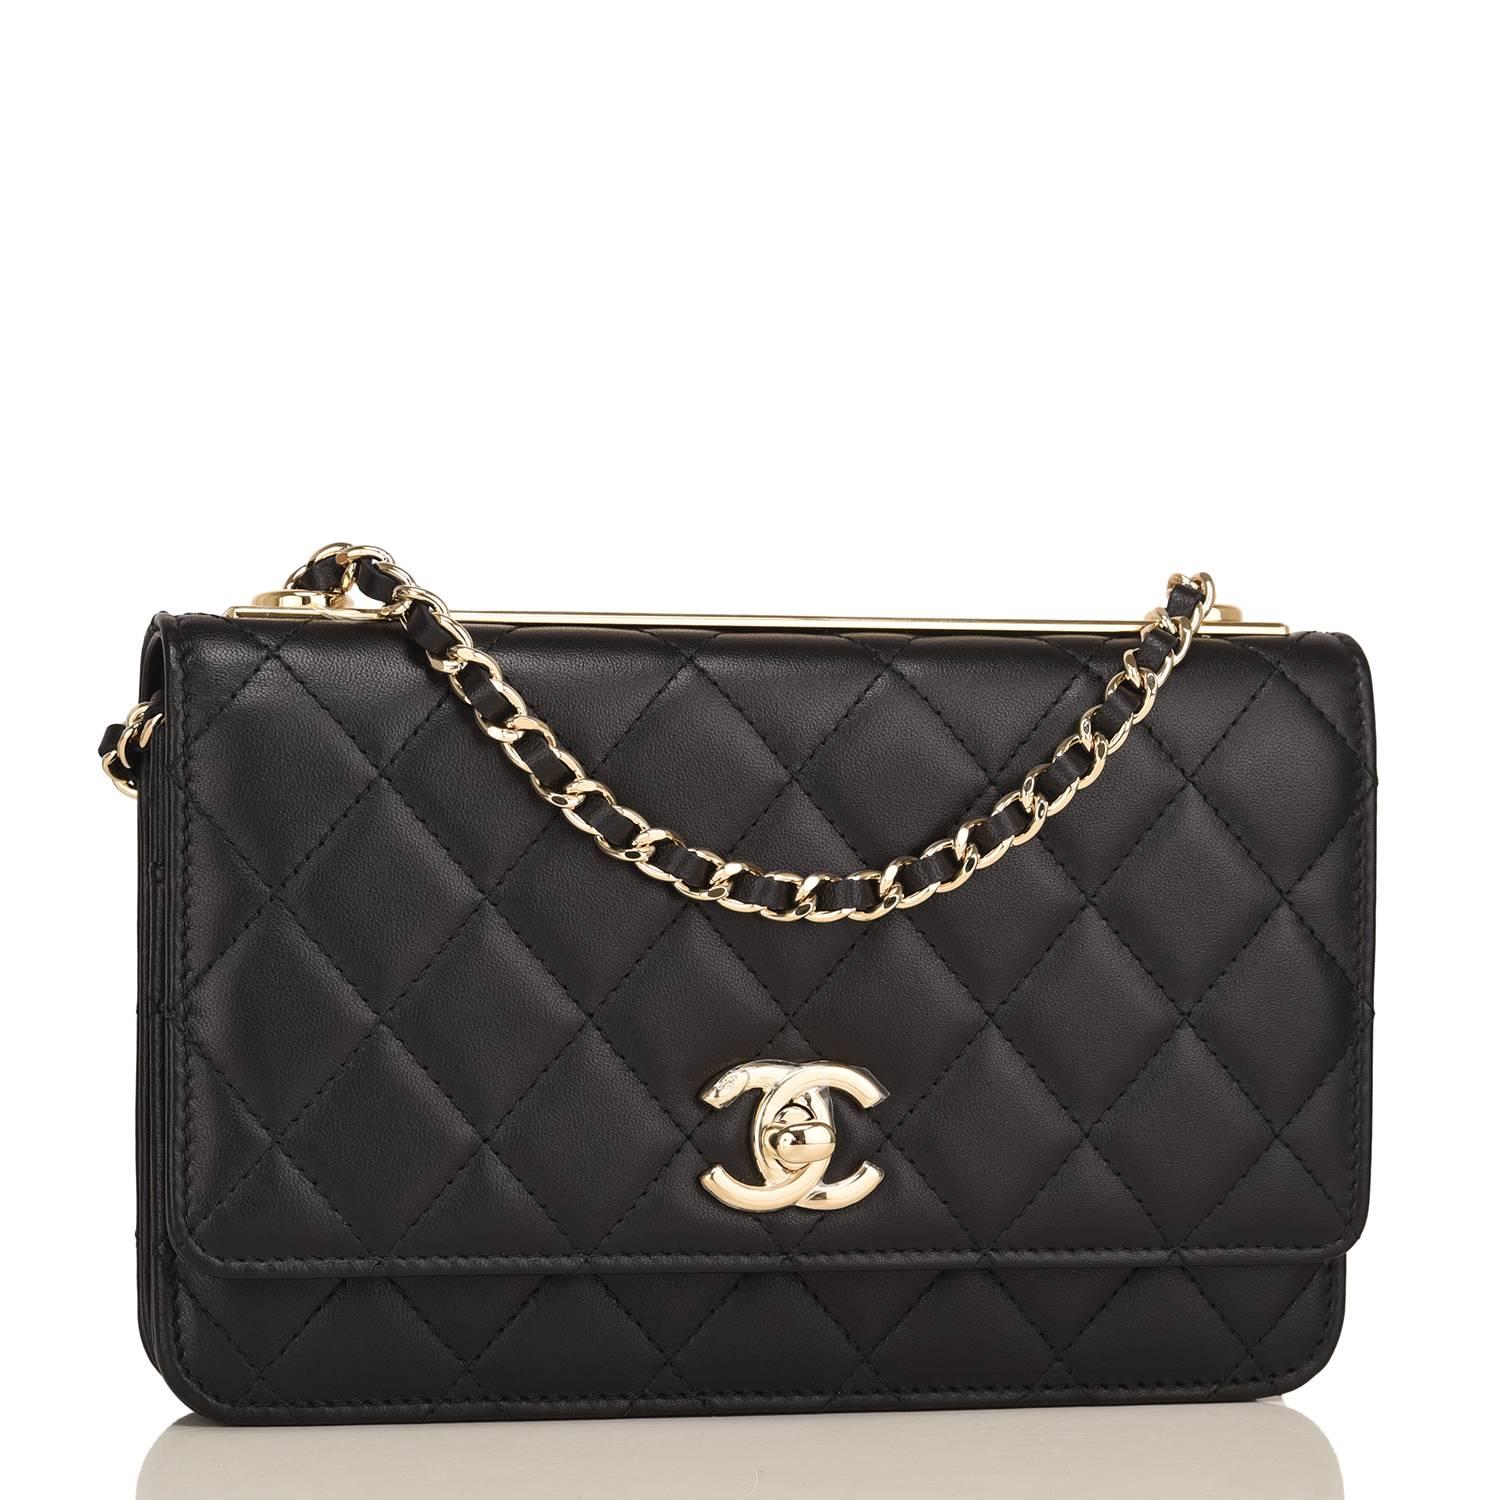 Excellent Condition Authentic Chanel I WOC Black Caviar Gold hardware from  Paris Rue De Cambon for Sale in Irvine, CA - OfferUp